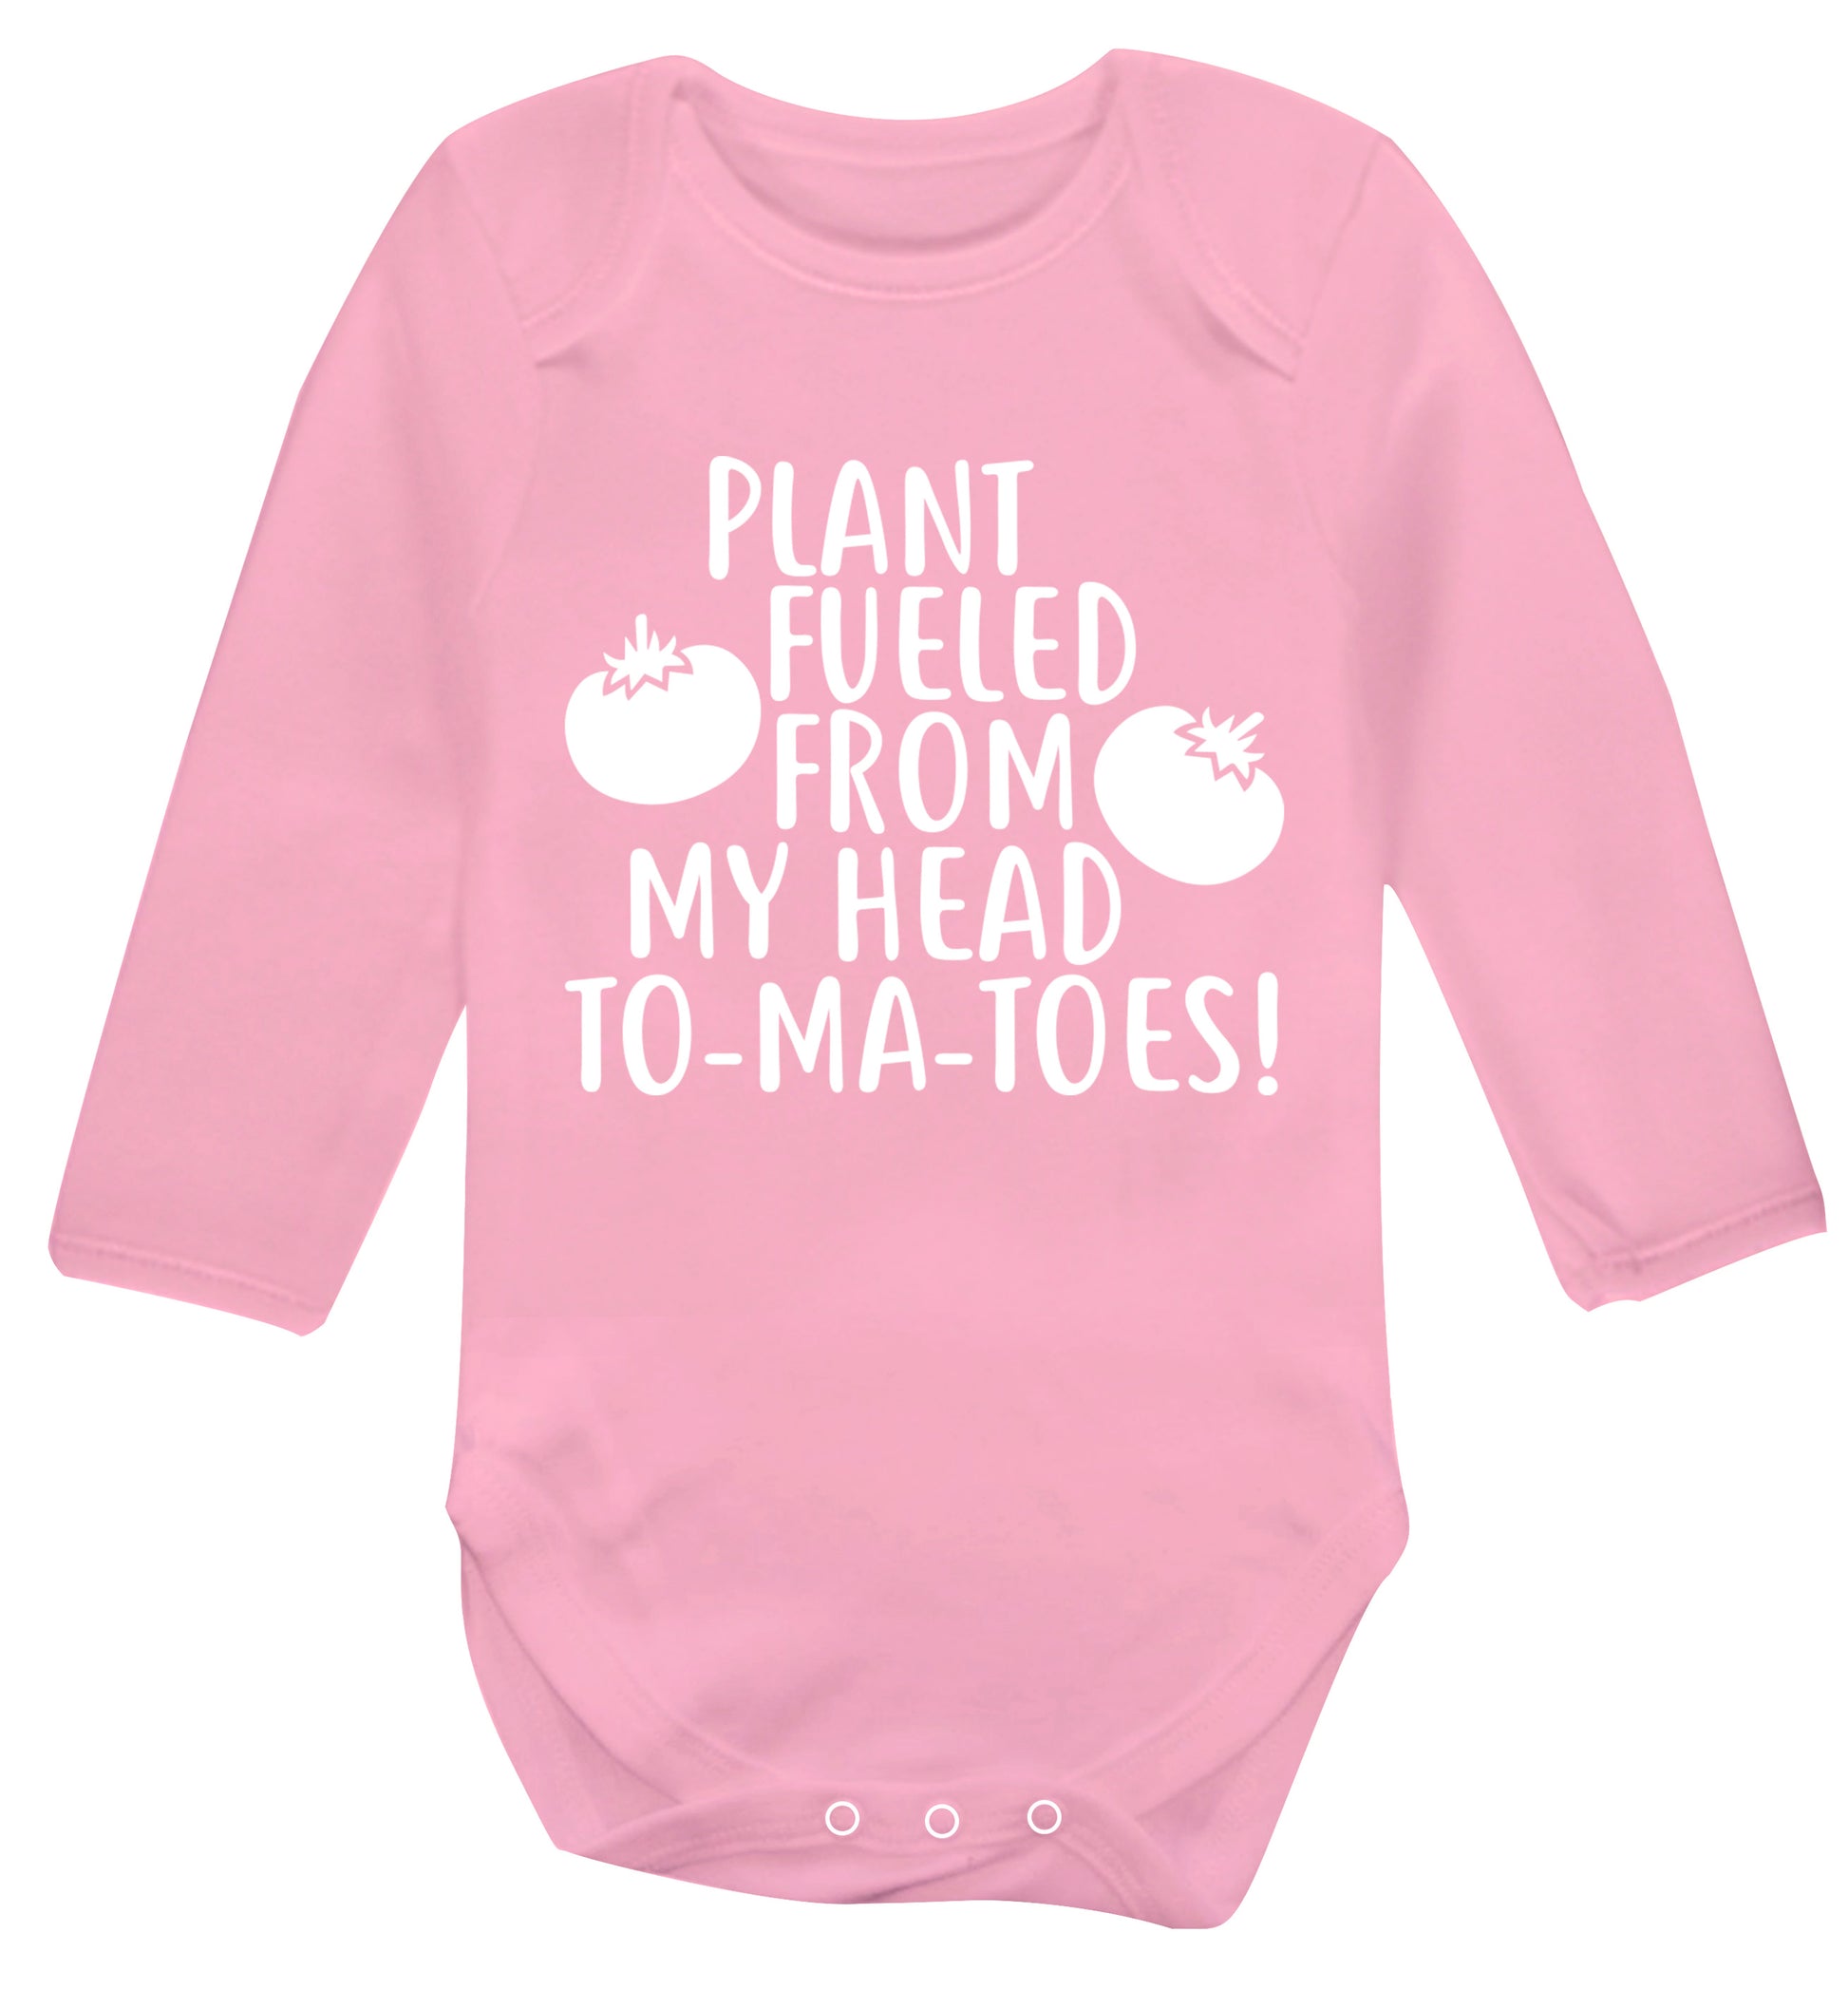 Plant fueled from my head to-ma-toes Baby Vest long sleeved pale pink 6-12 months